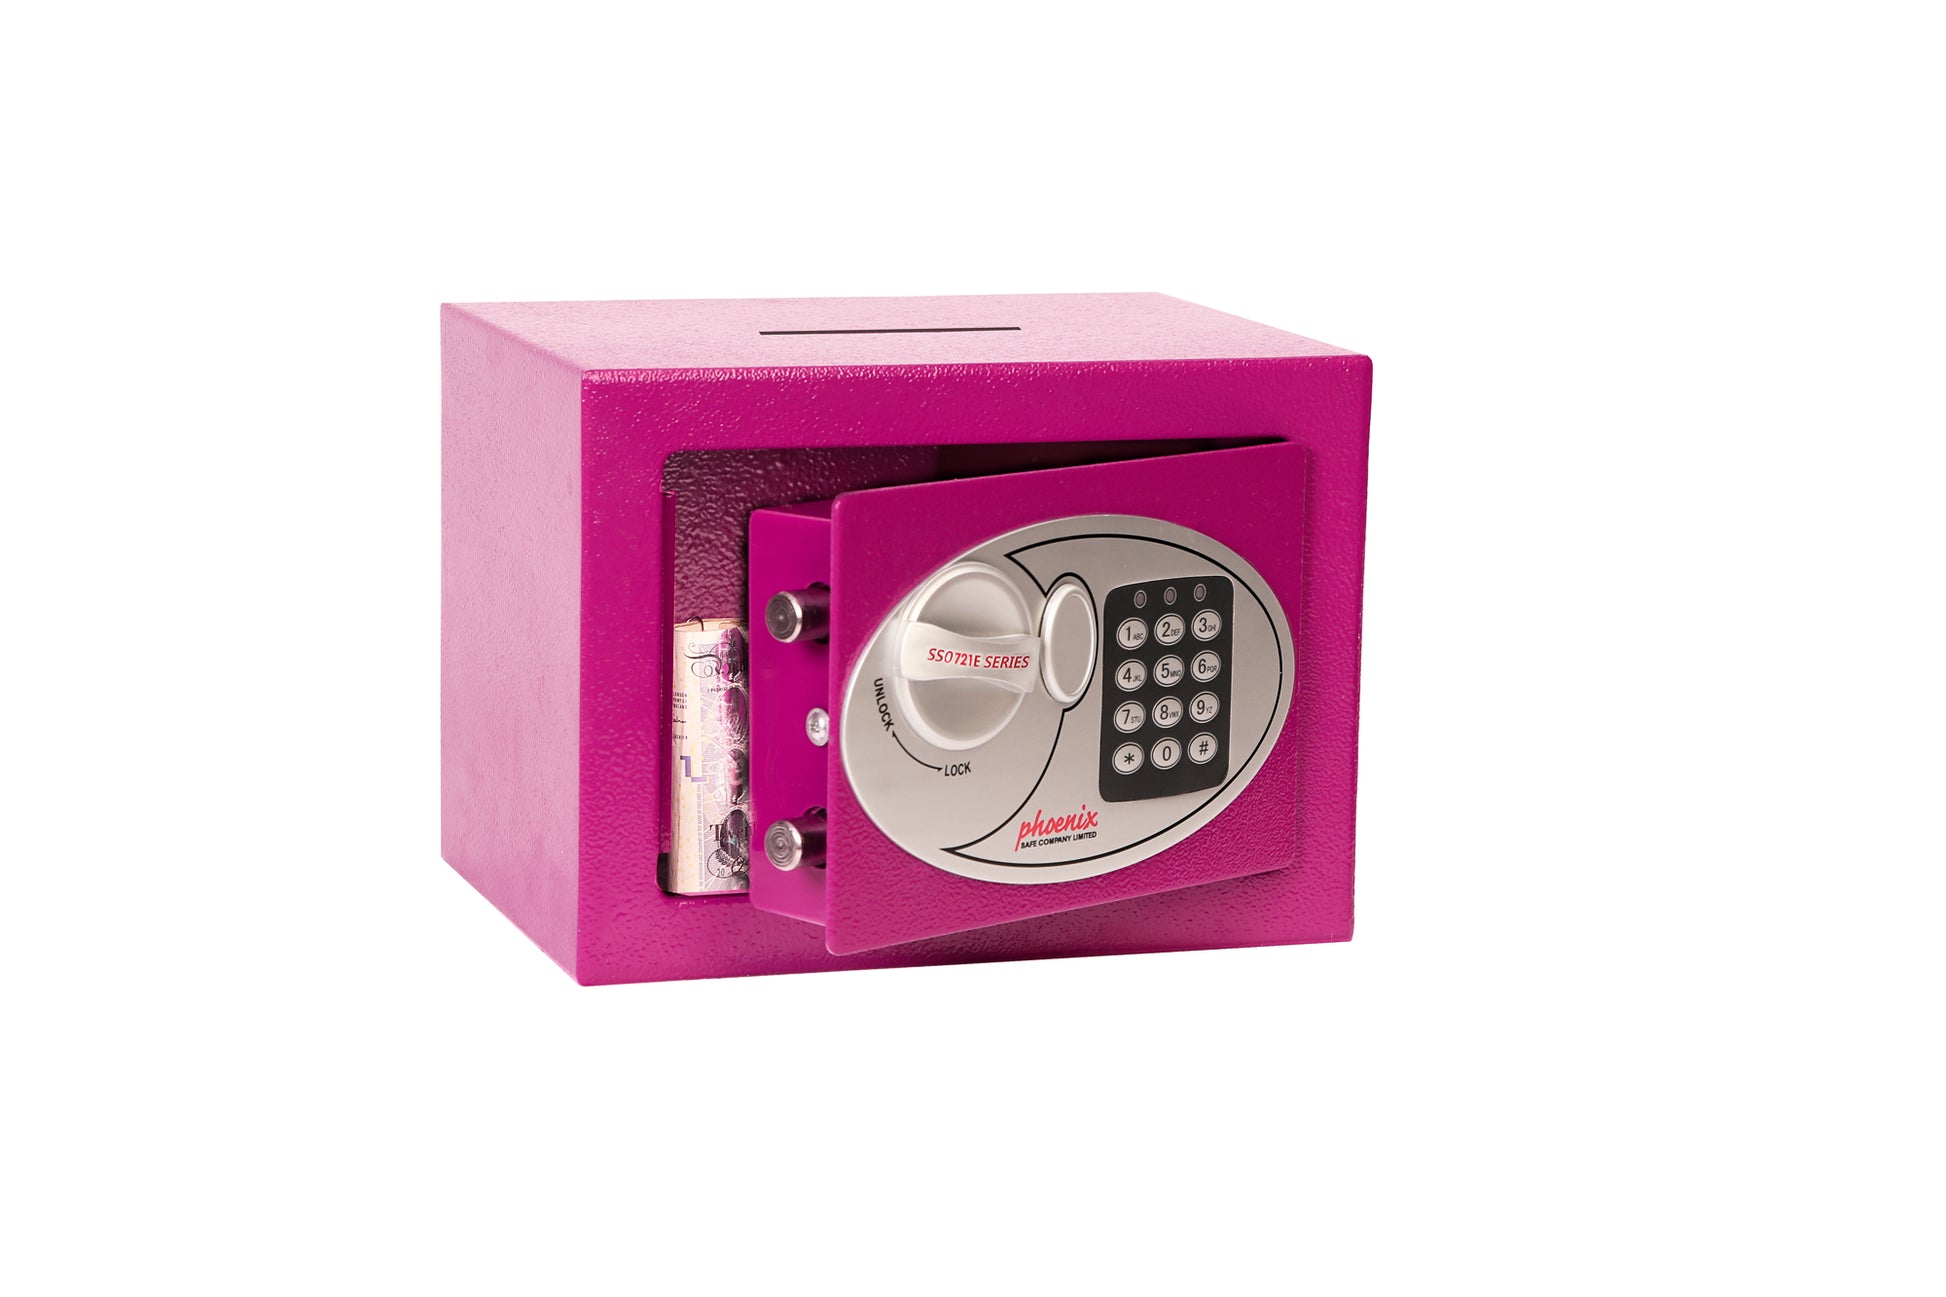 Phoenix Compact Home Office Security Safe